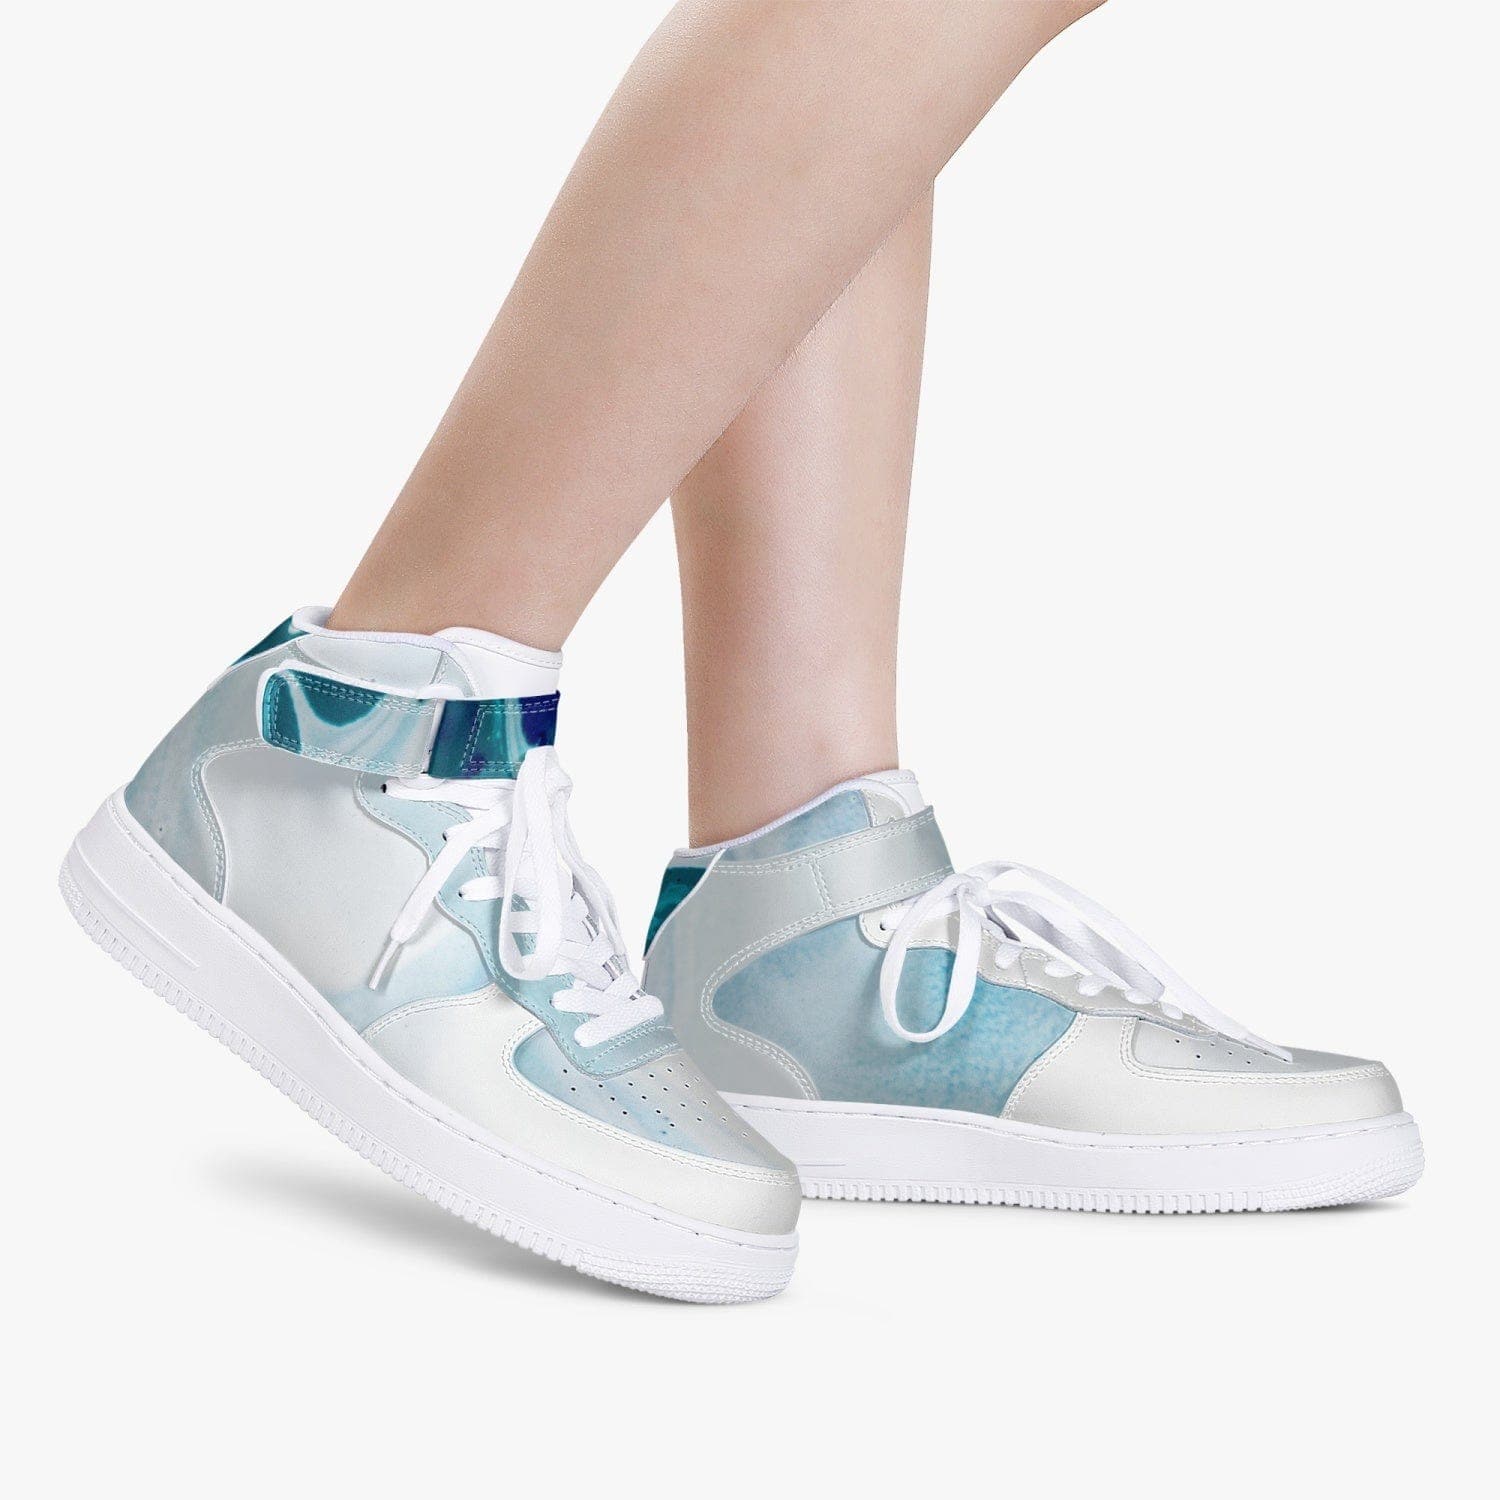 Heavenly Blue - High-Top Leather Sports Sneakers, designed by Sensus Studio